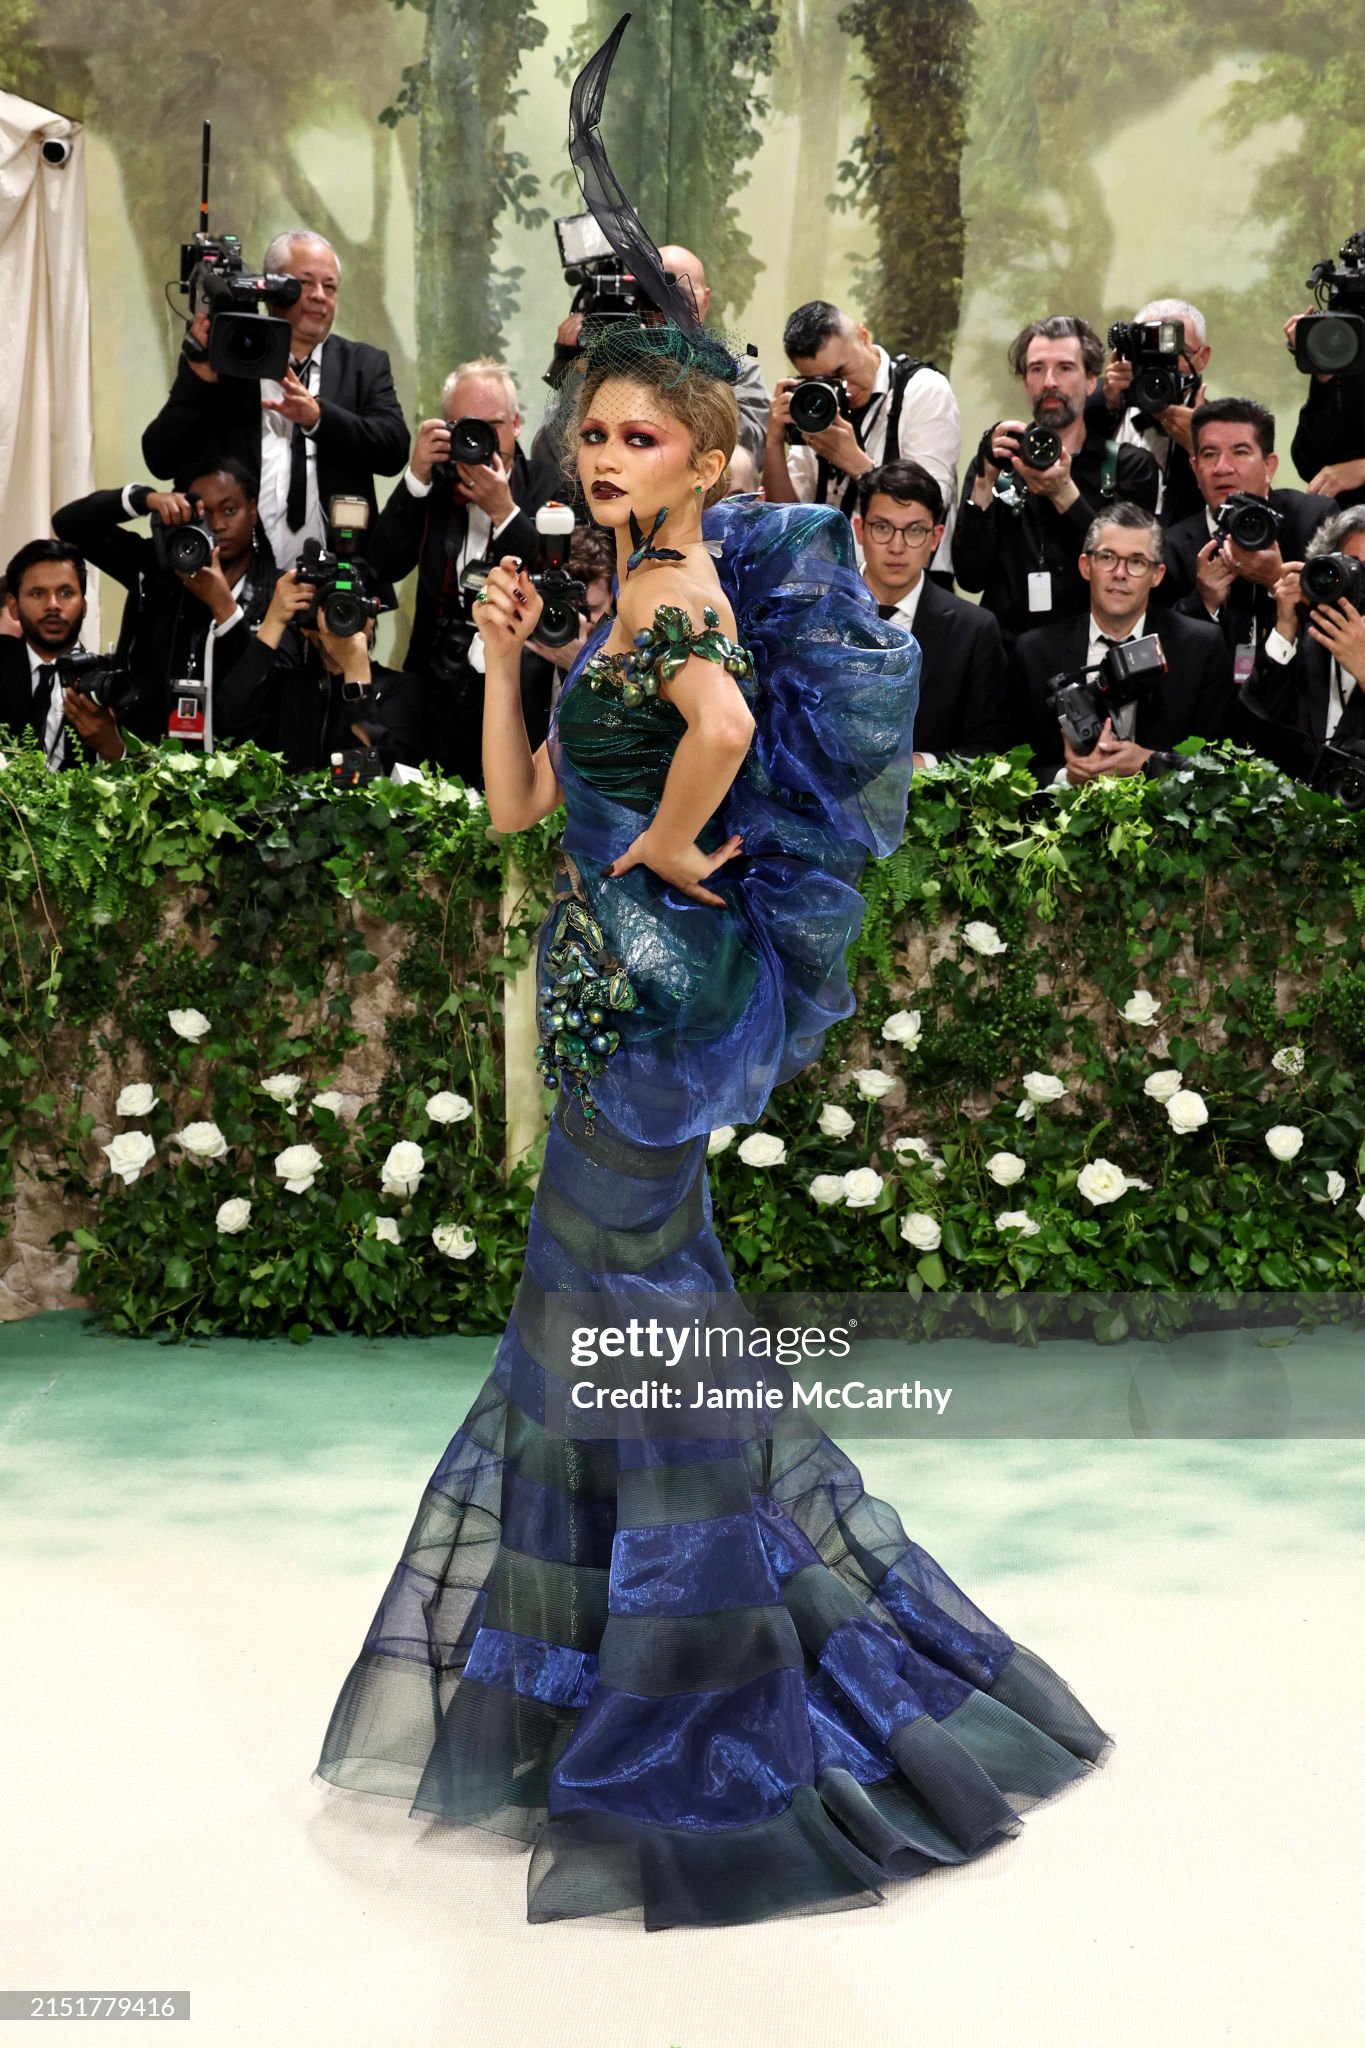 gettyimages-2151779416-2048x2048.jpg